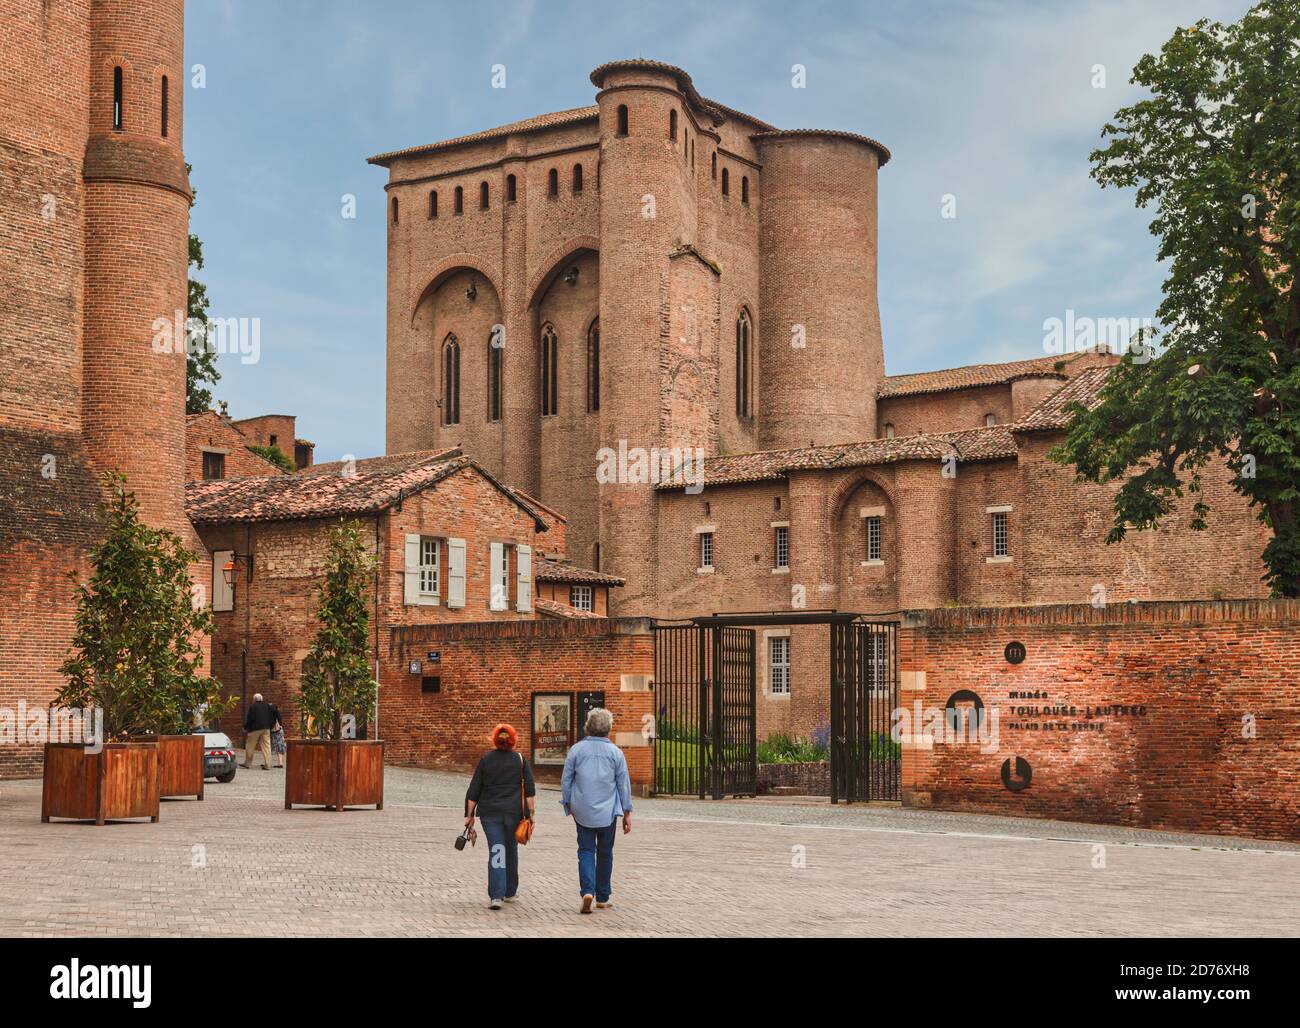 Albi, Tarn Department, France.  Palais de la Berbie, formerly the Bishops' Palace of Albi, now the Toulouse-Lautrec Museum, is part of Albi's UNESCO W Stock Photo